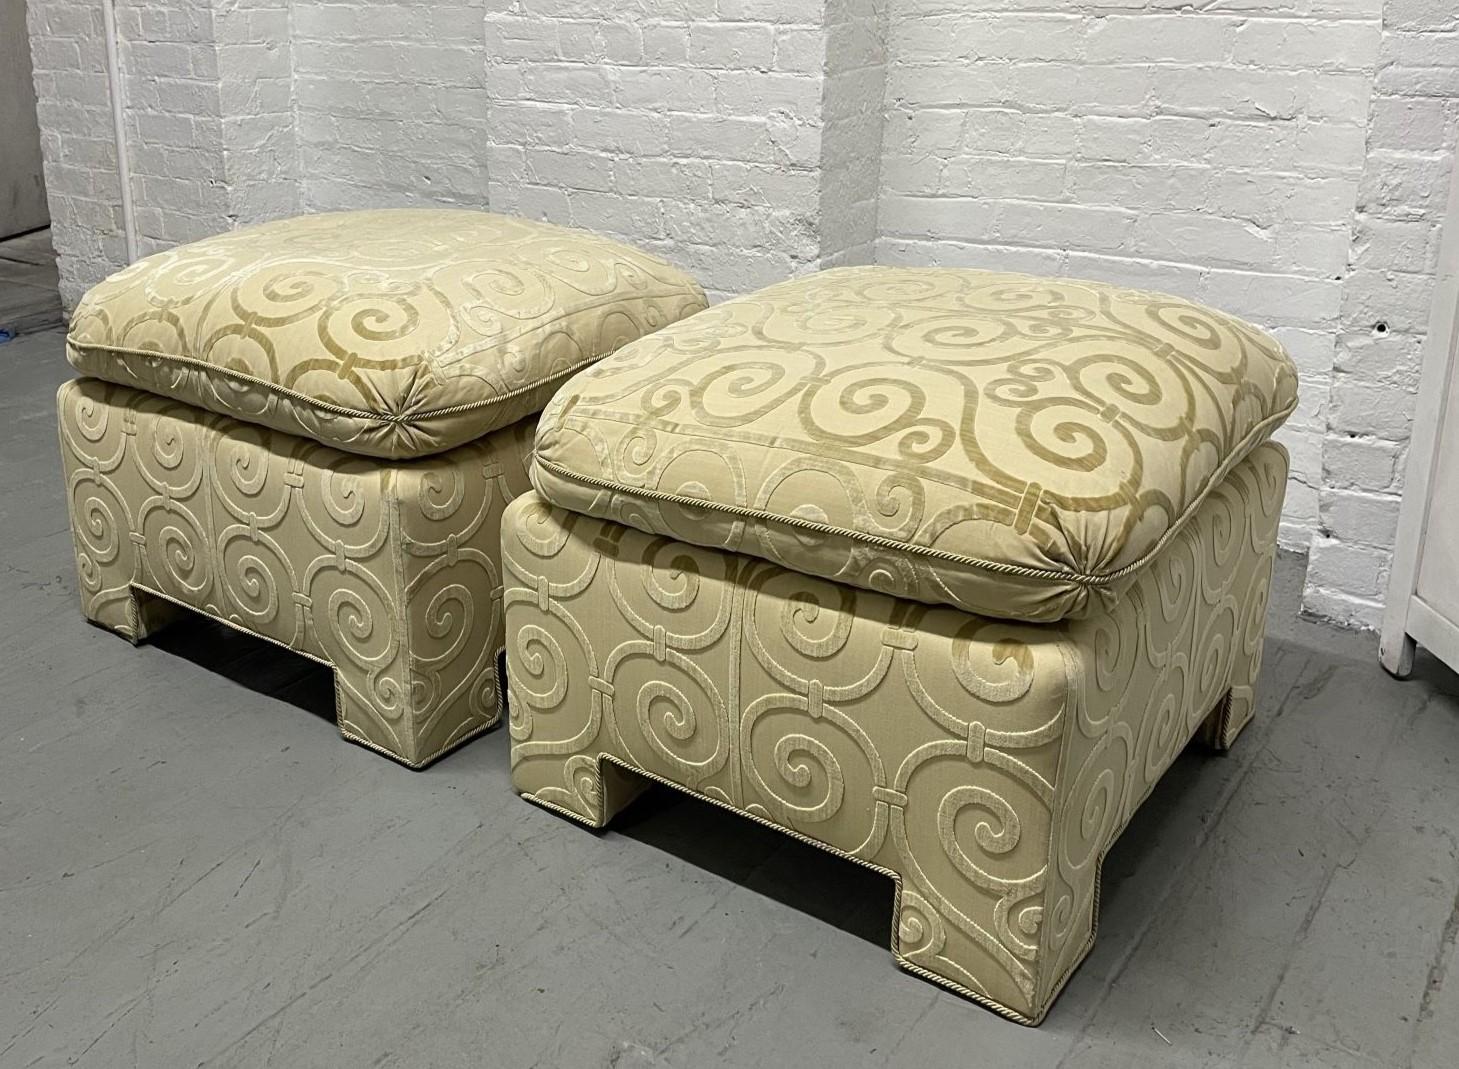 Pair of custom-made Damask velvet ottomans with down filled cushions.